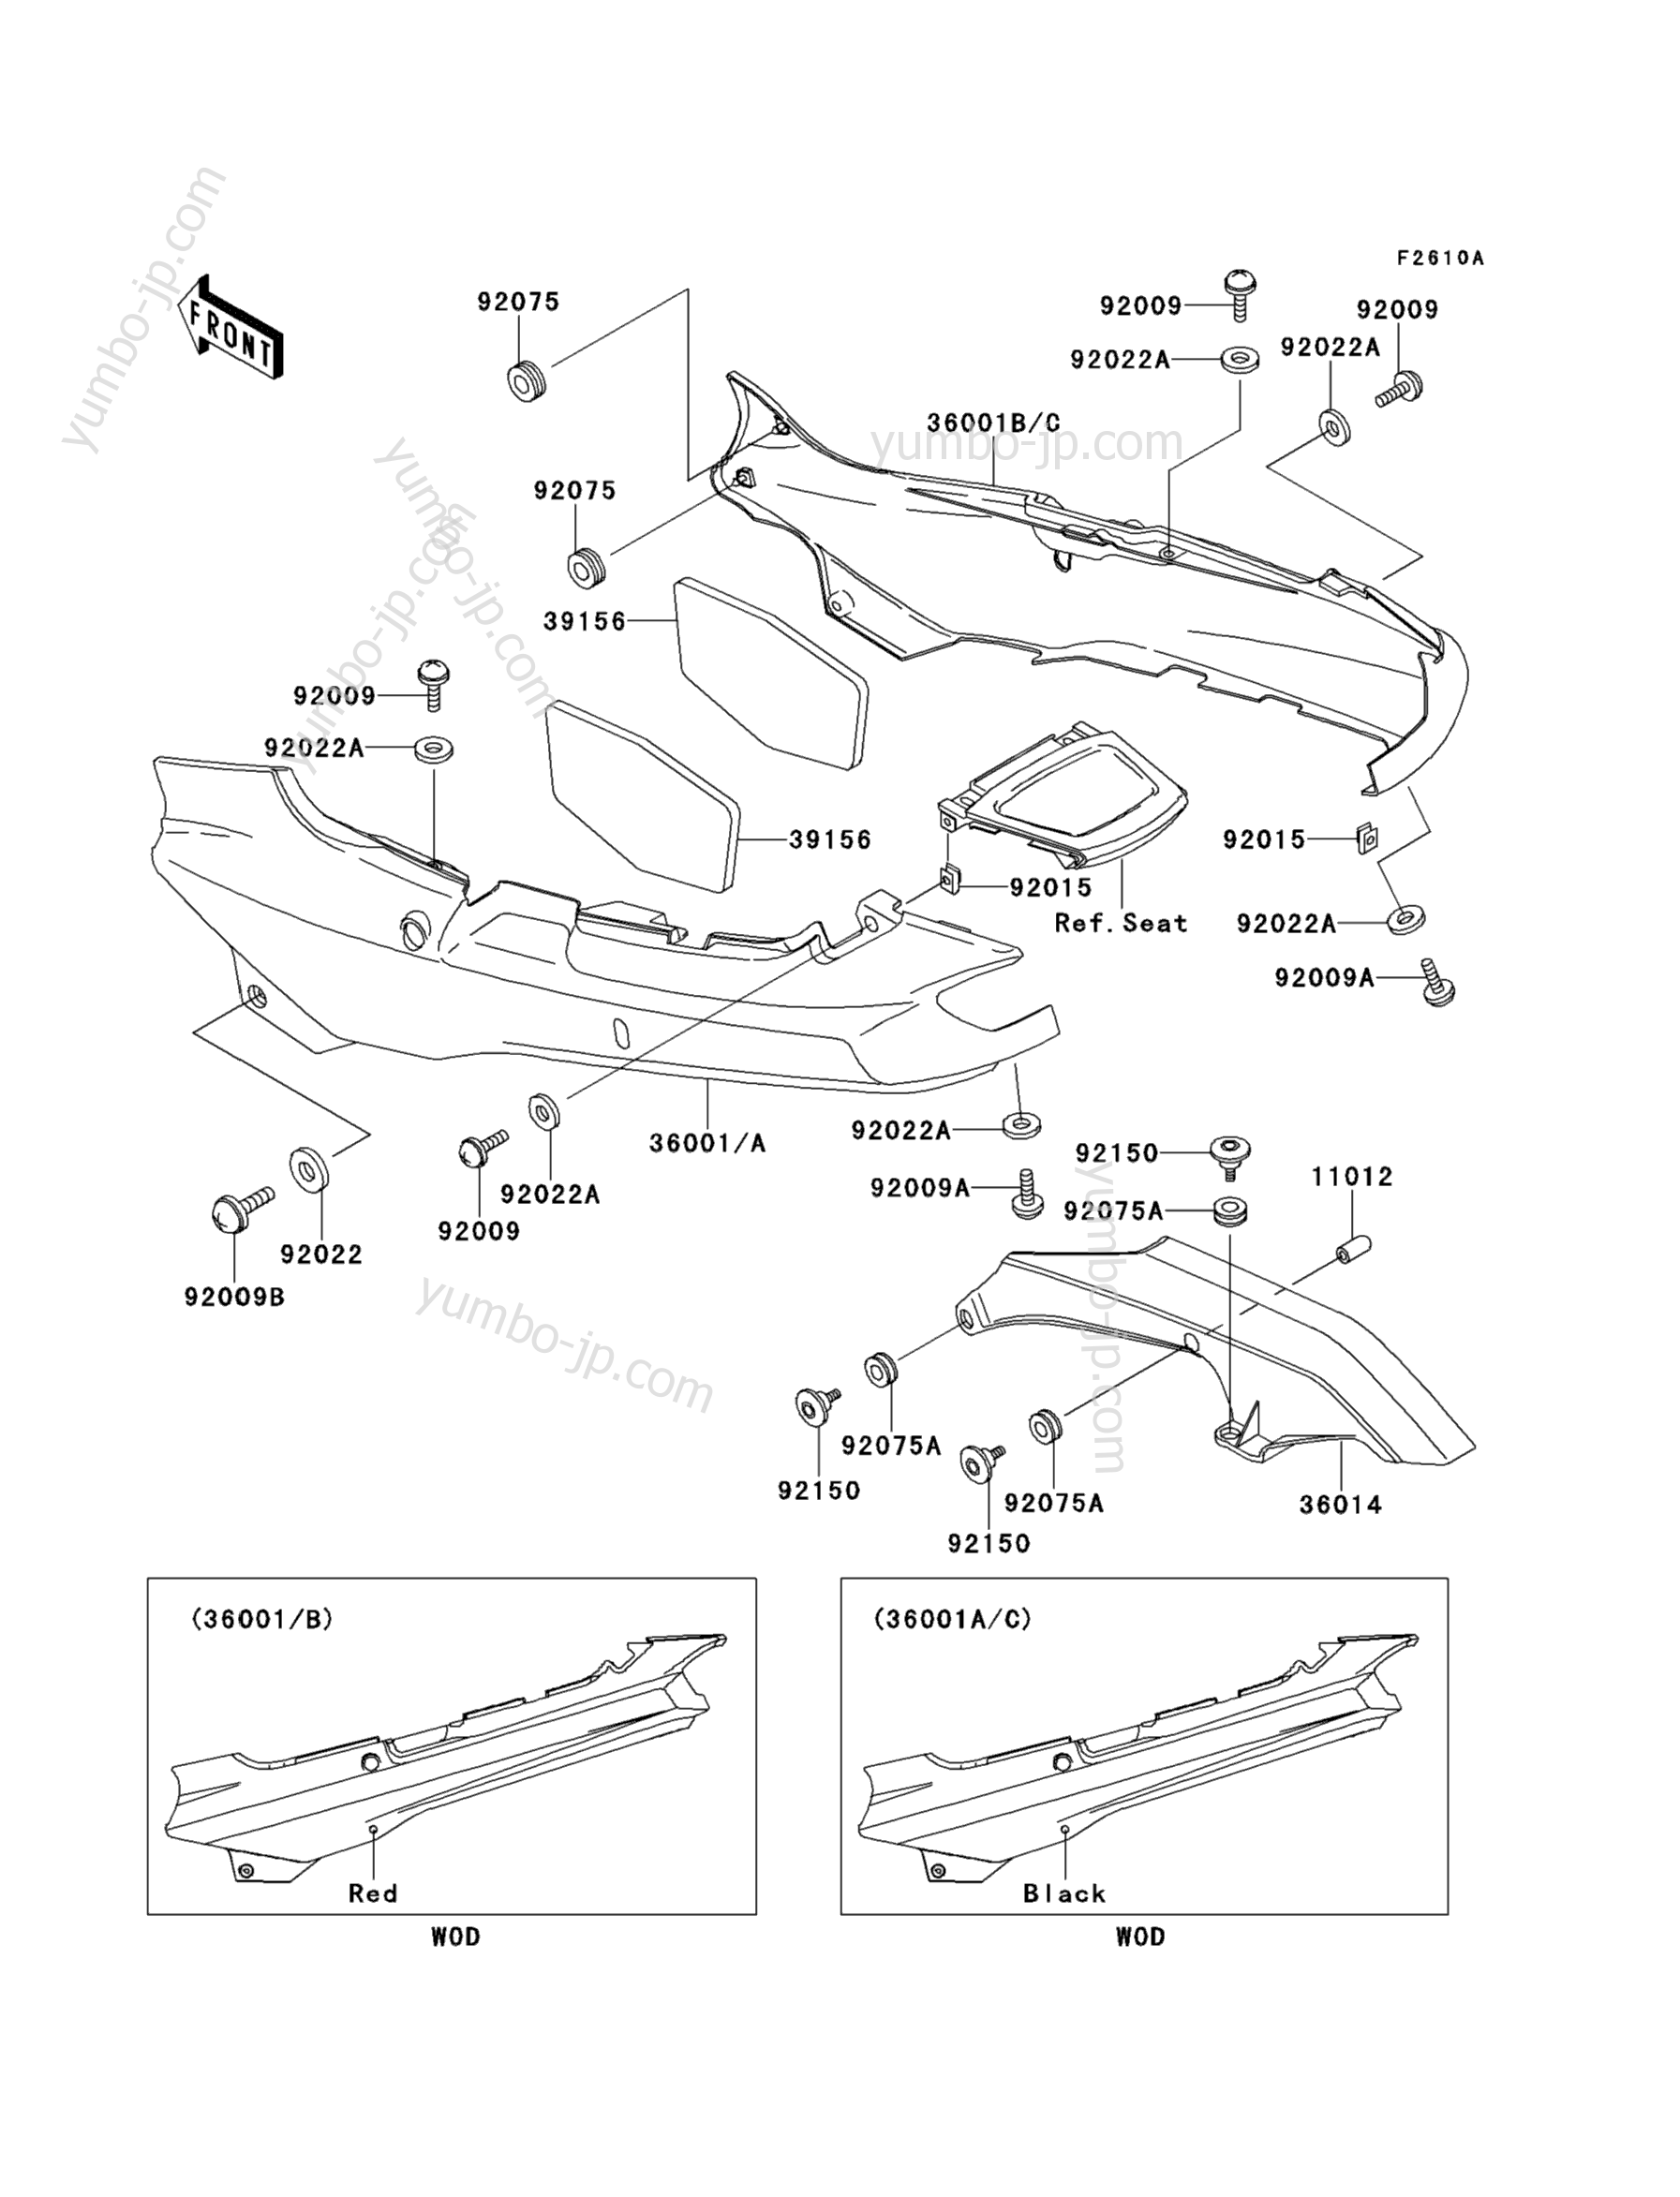 Side Covers/Chain Cover(ZX1100-E2/E3) for motorcycles KAWASAKI GPZ1100 (ZX1100-E3) 1997 year